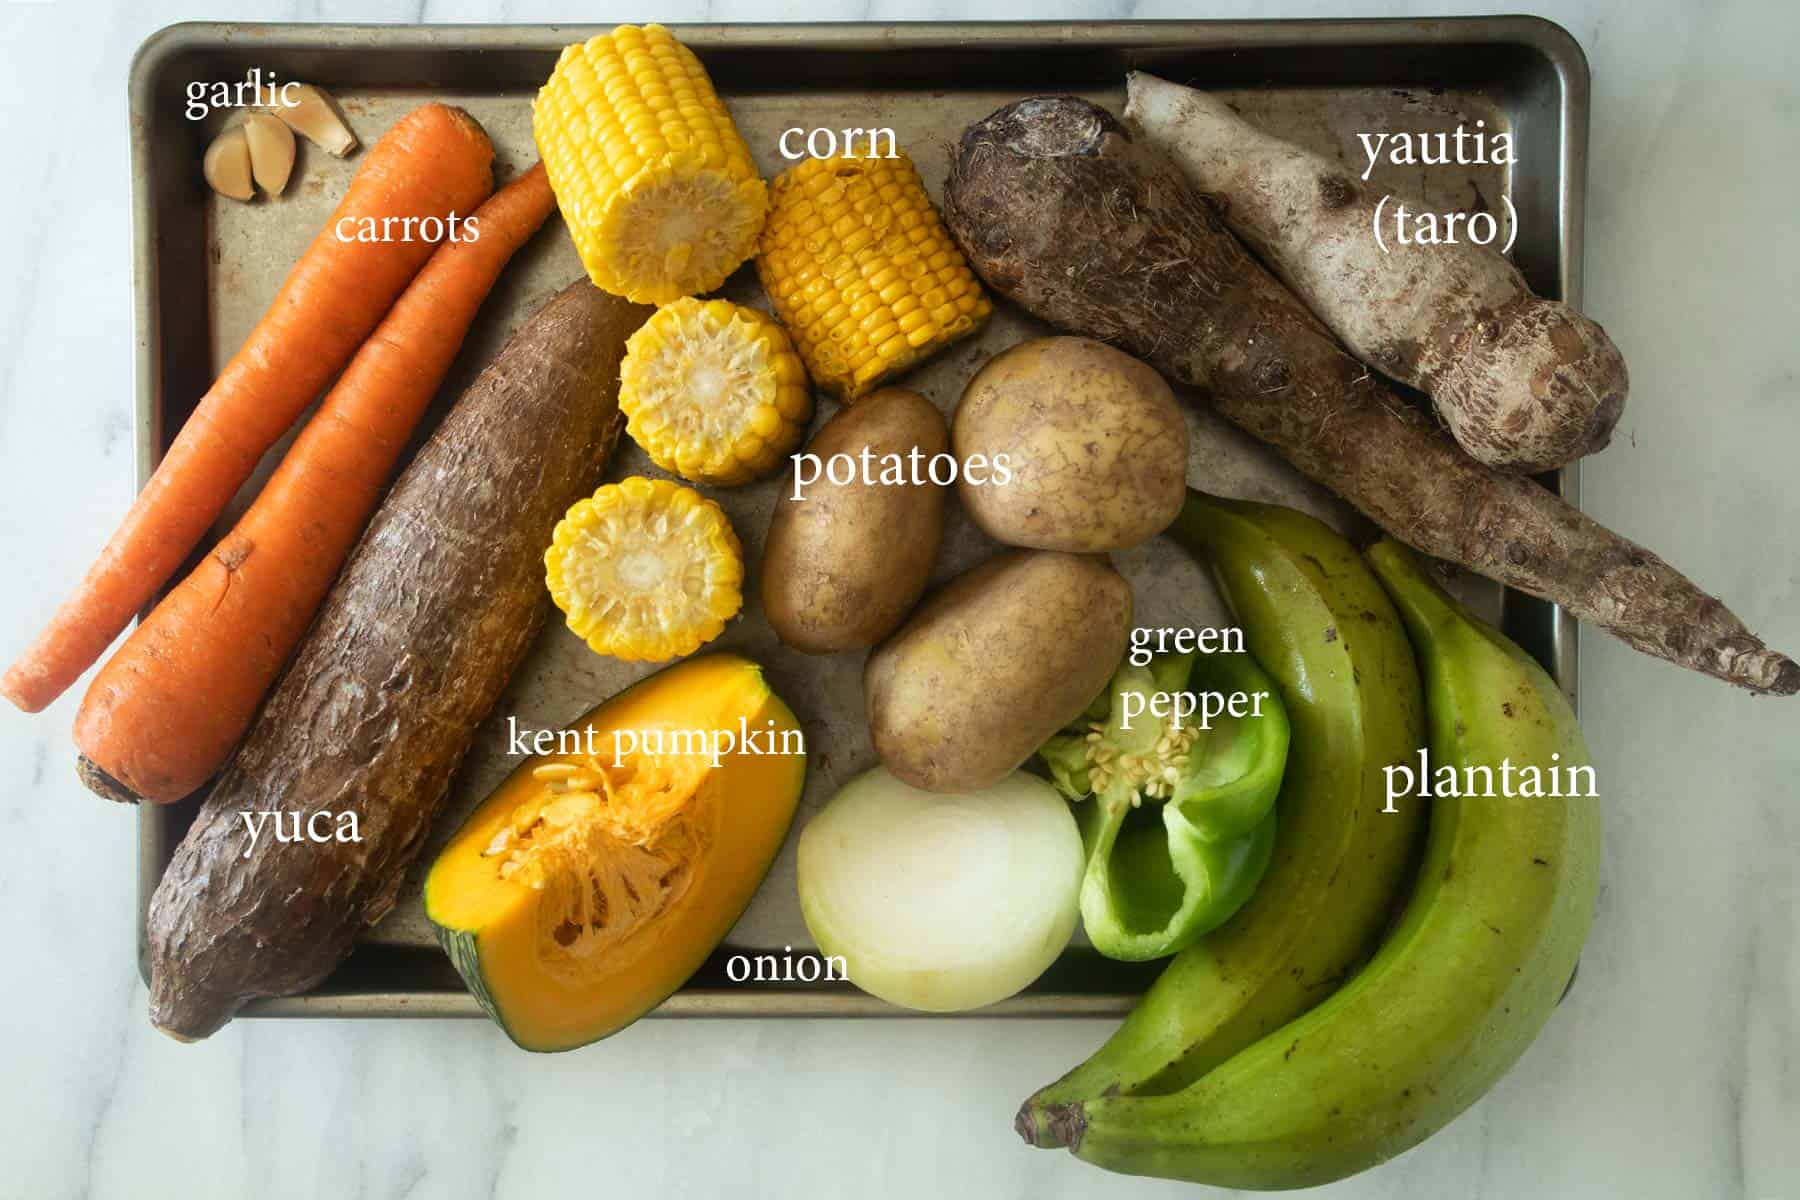 tray full of the vegetable ingredients needed to make sancocho.